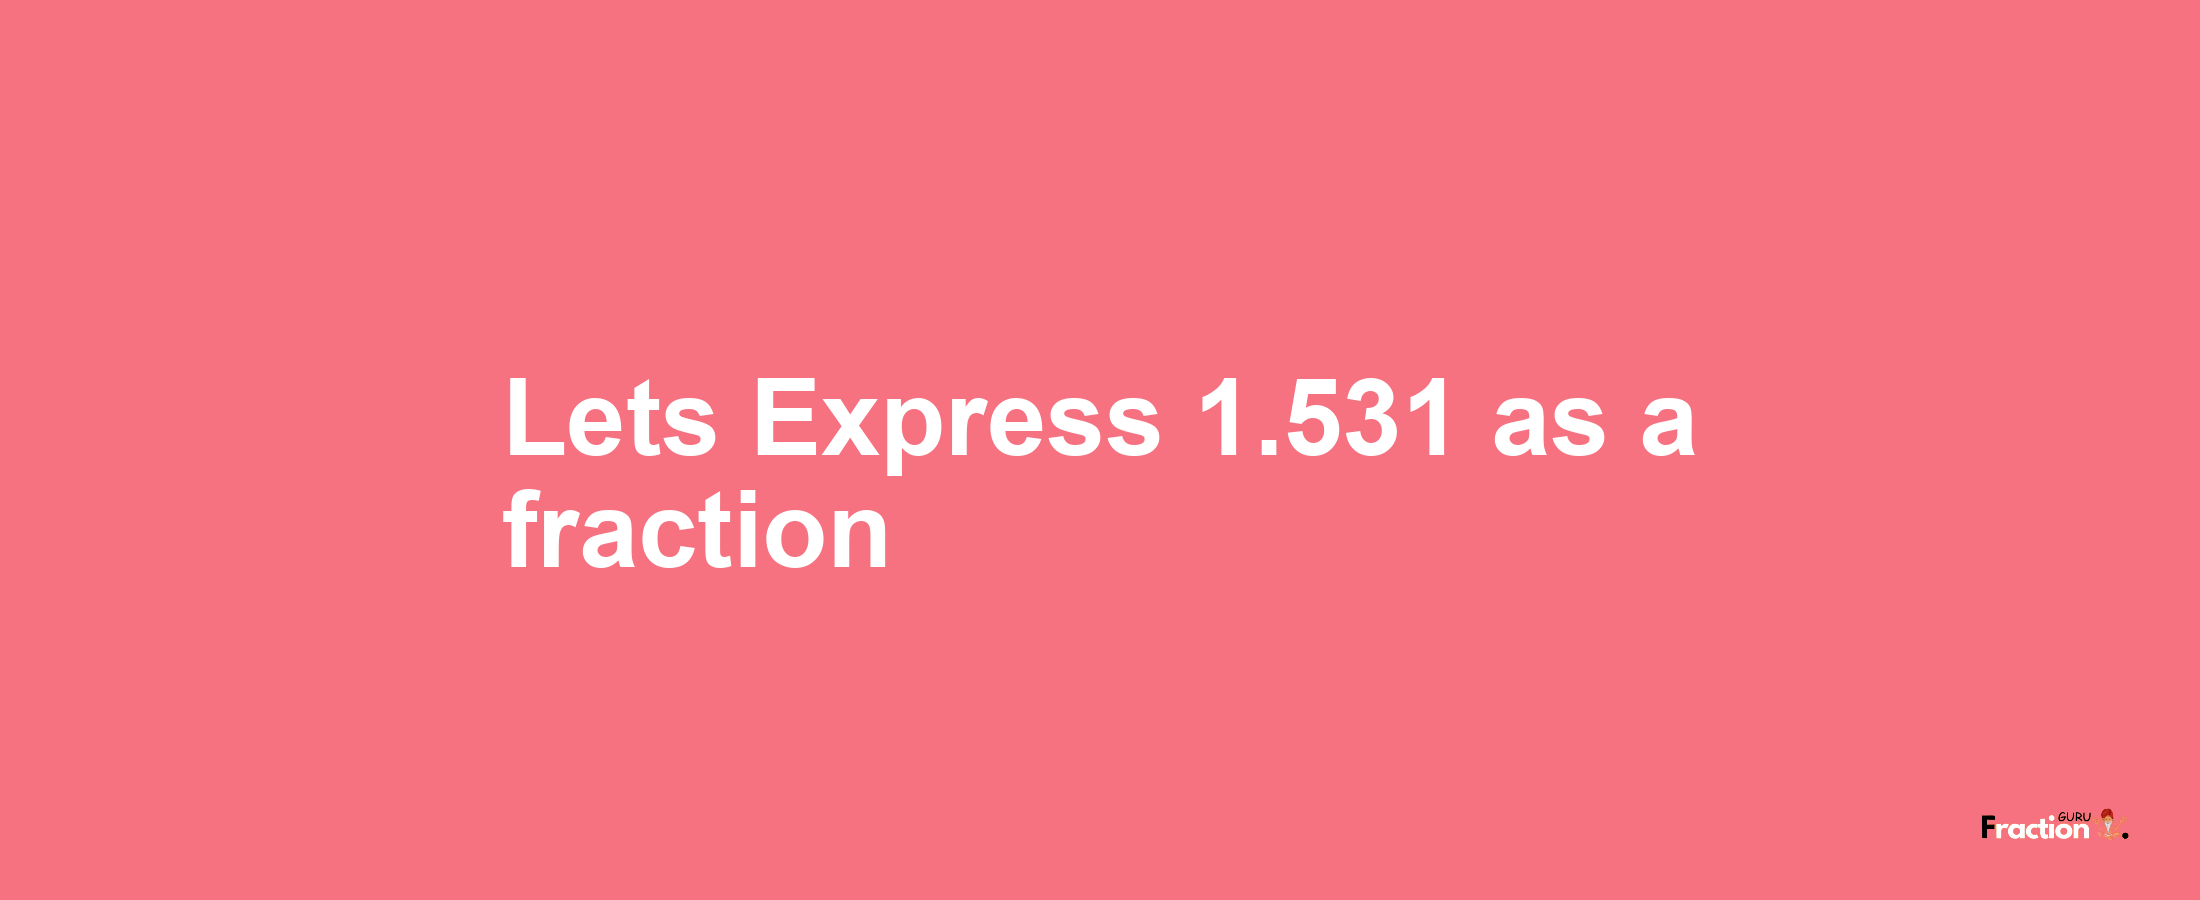 Lets Express 1.531 as afraction